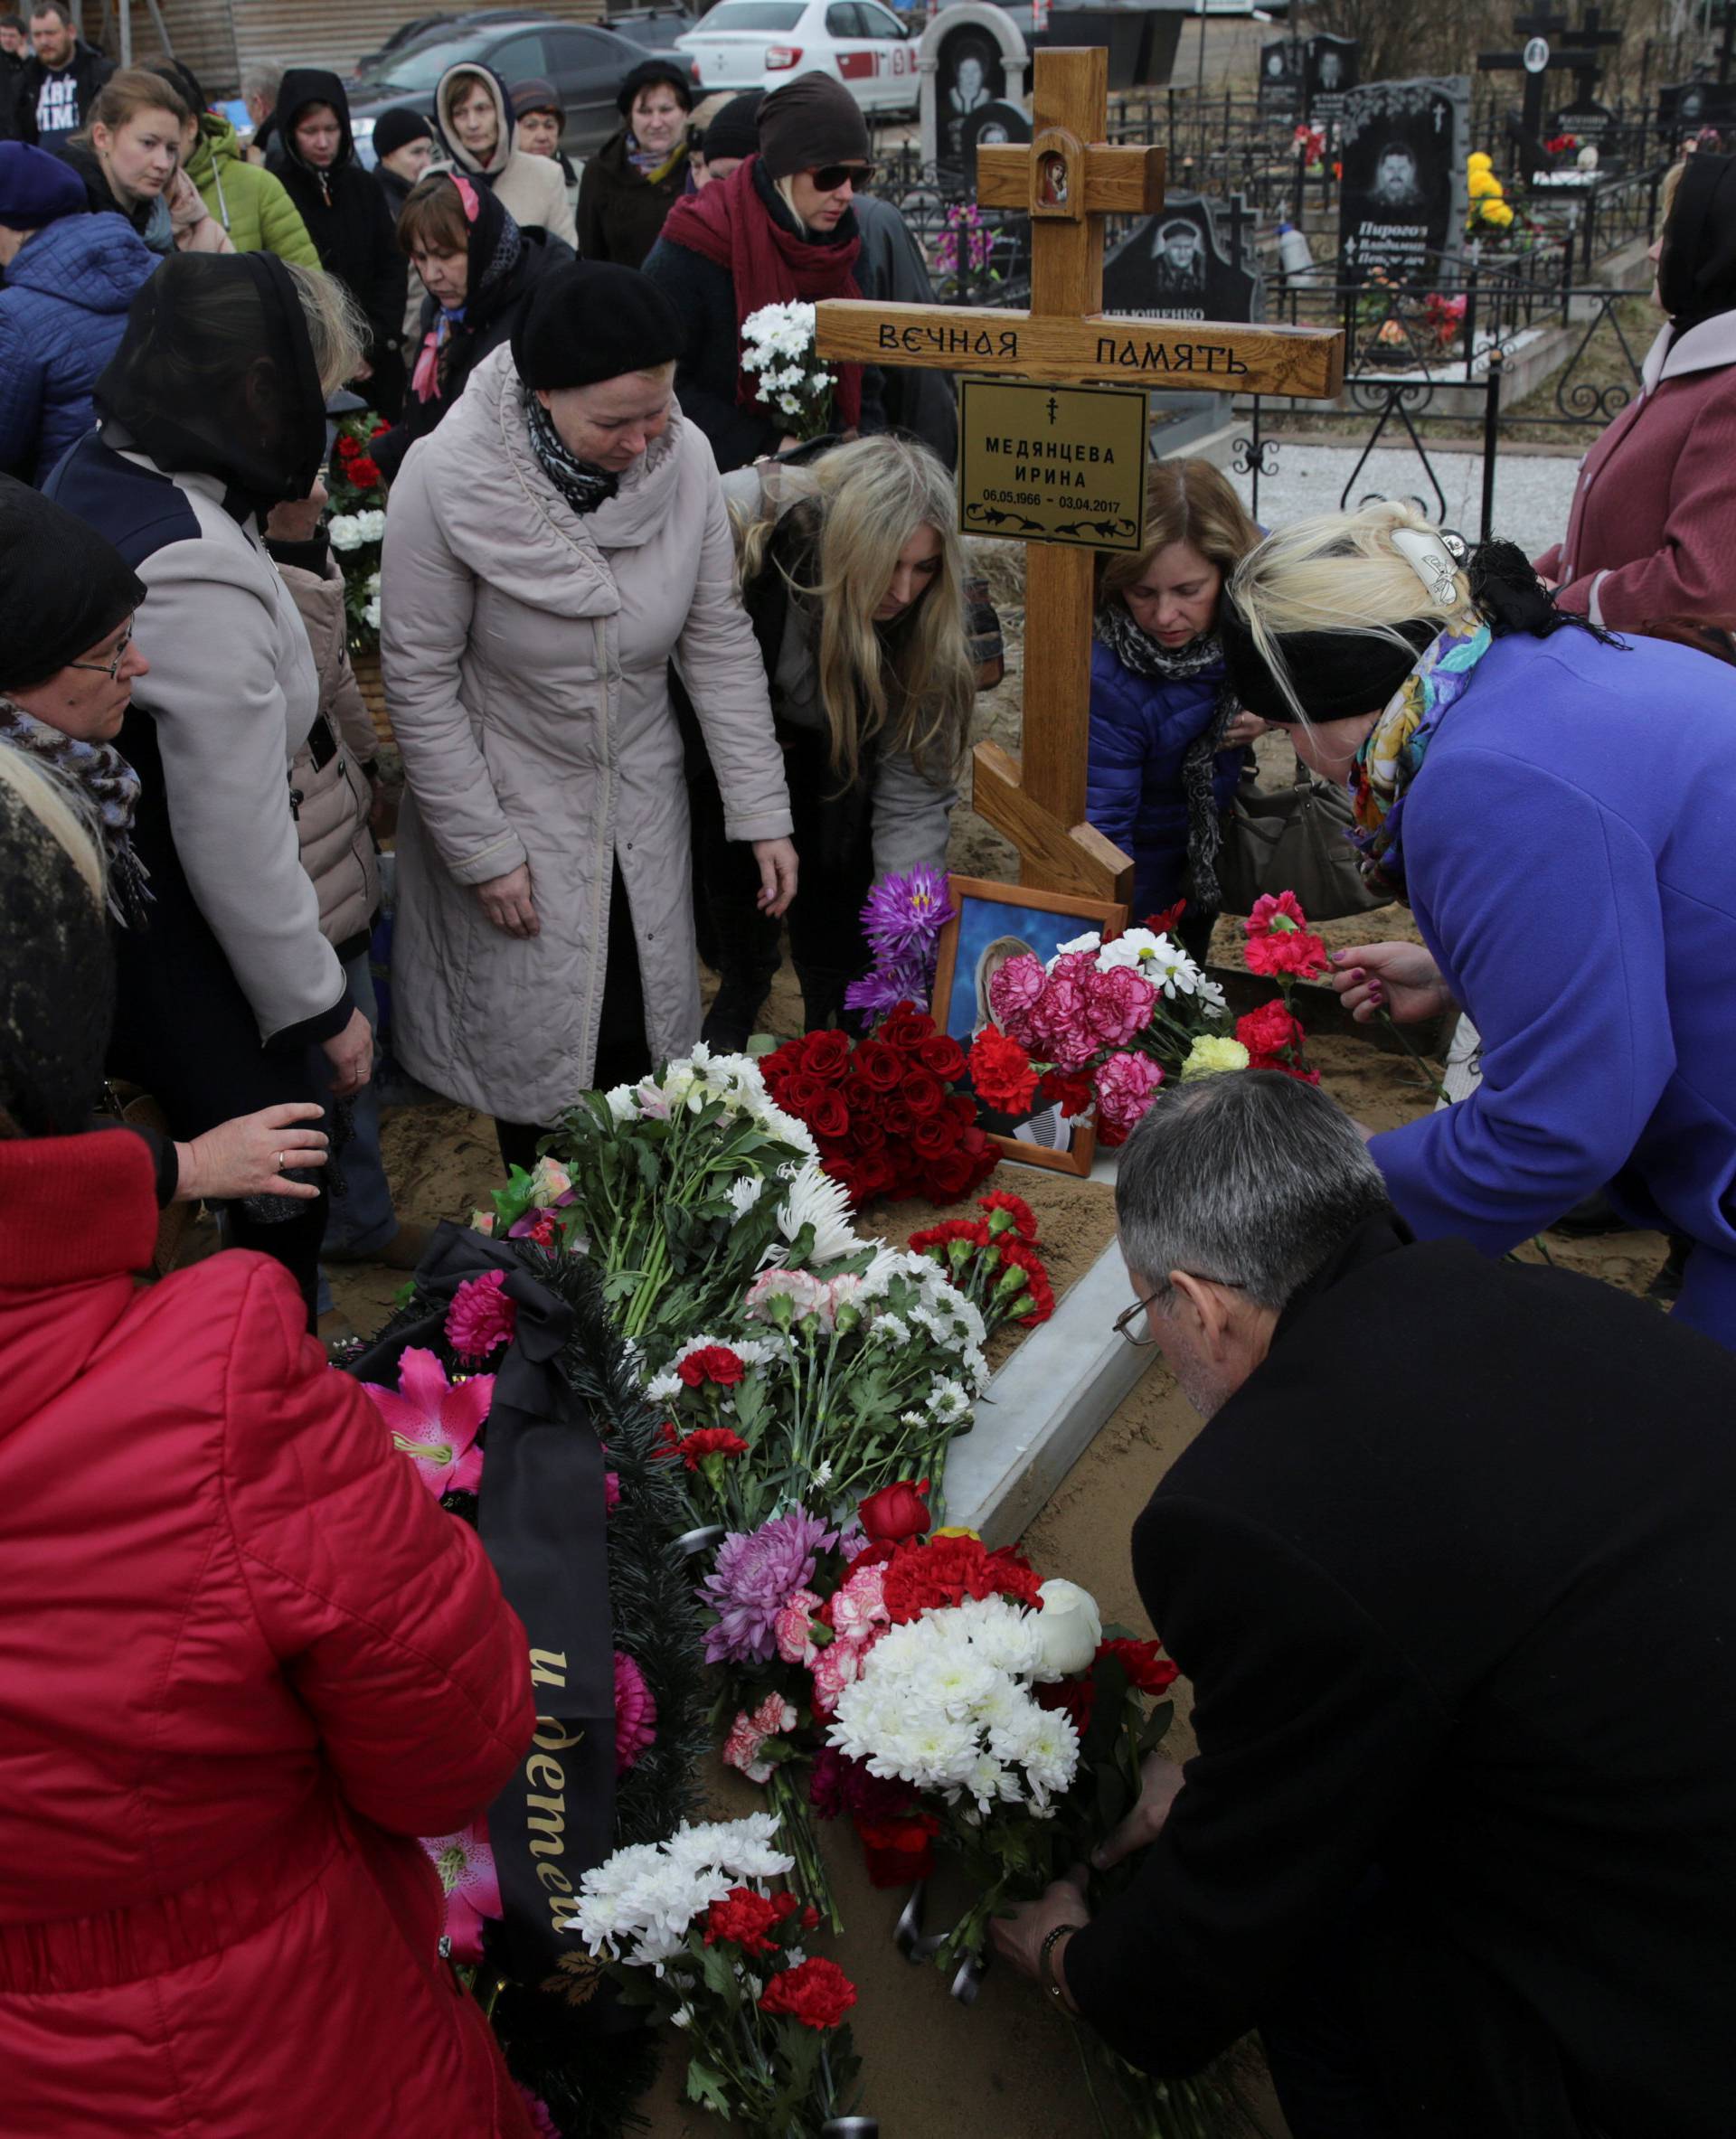 Relatives and friends attend a funeral of Medyantseva, victim of the St. Petersburg metro blast, at the cemetery in the town of Dzerzhinsky